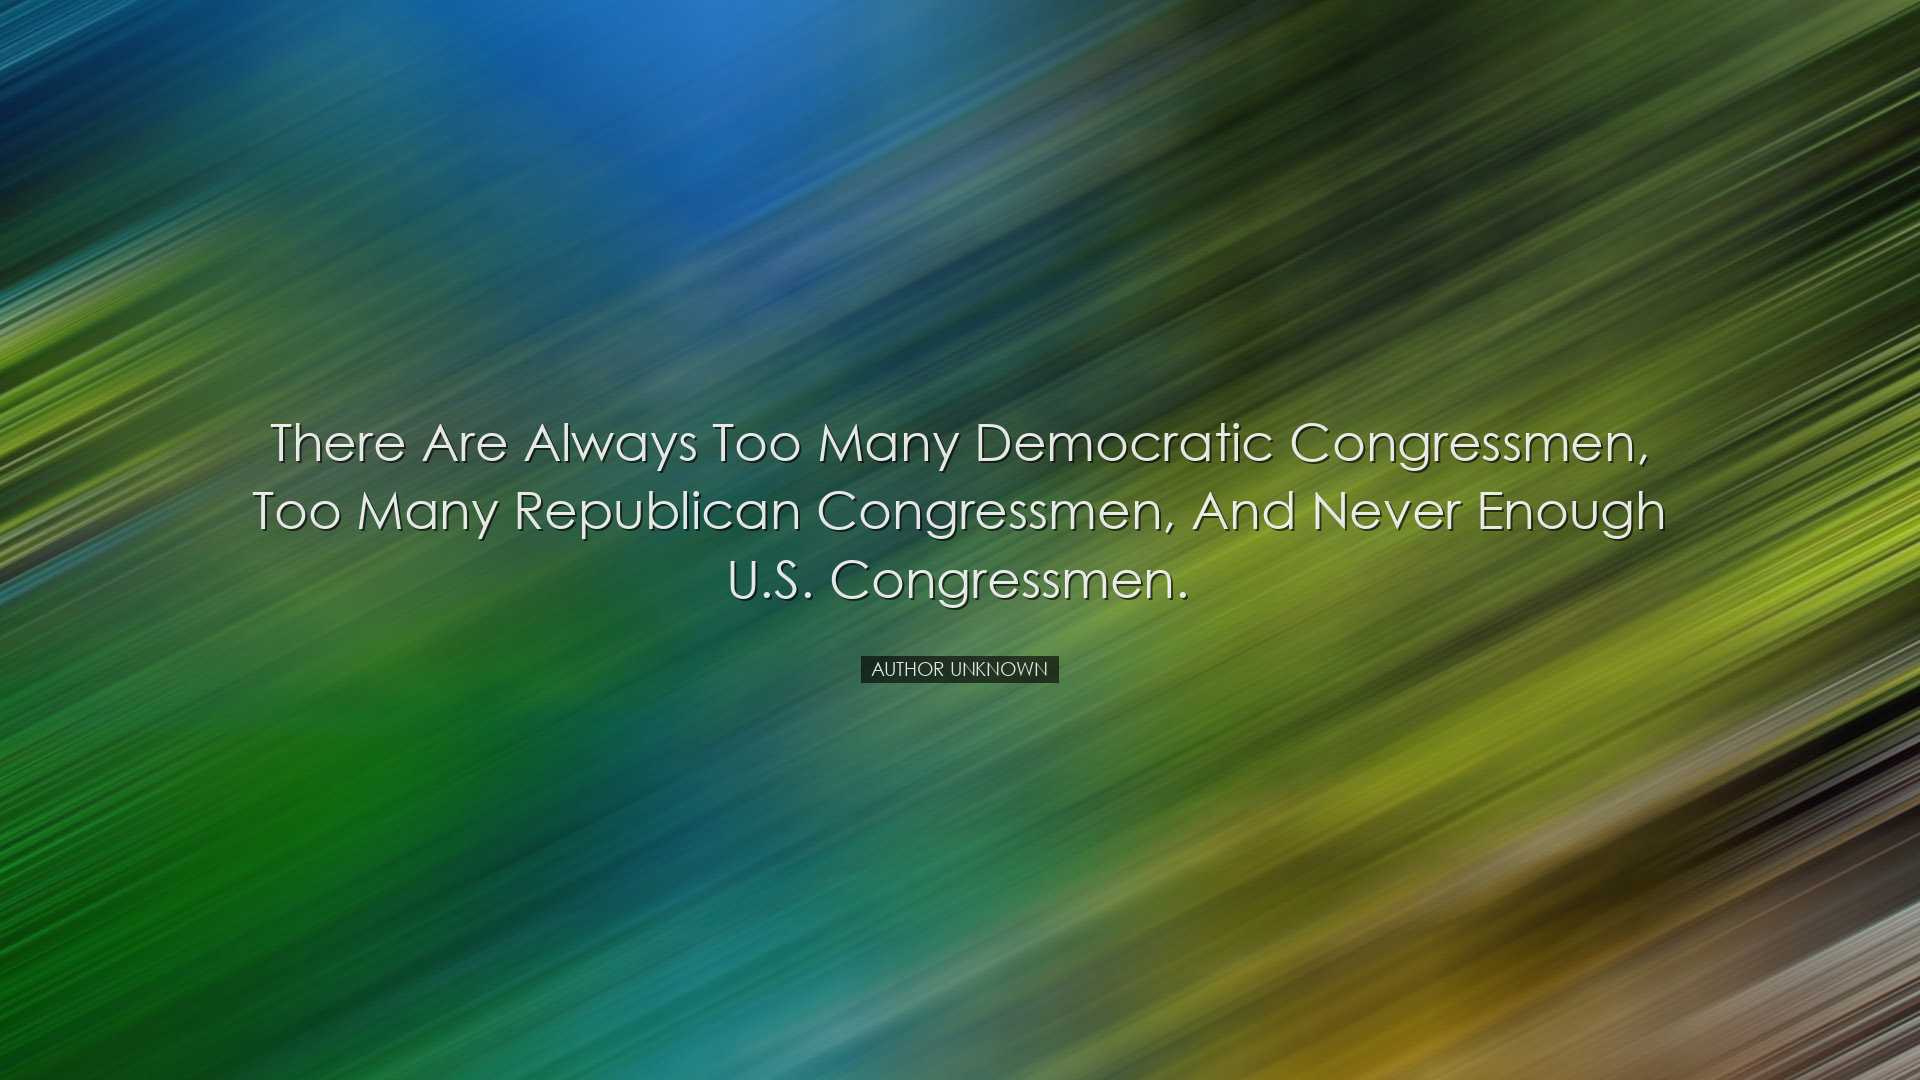 There are always too many Democratic congressmen, too many Republi